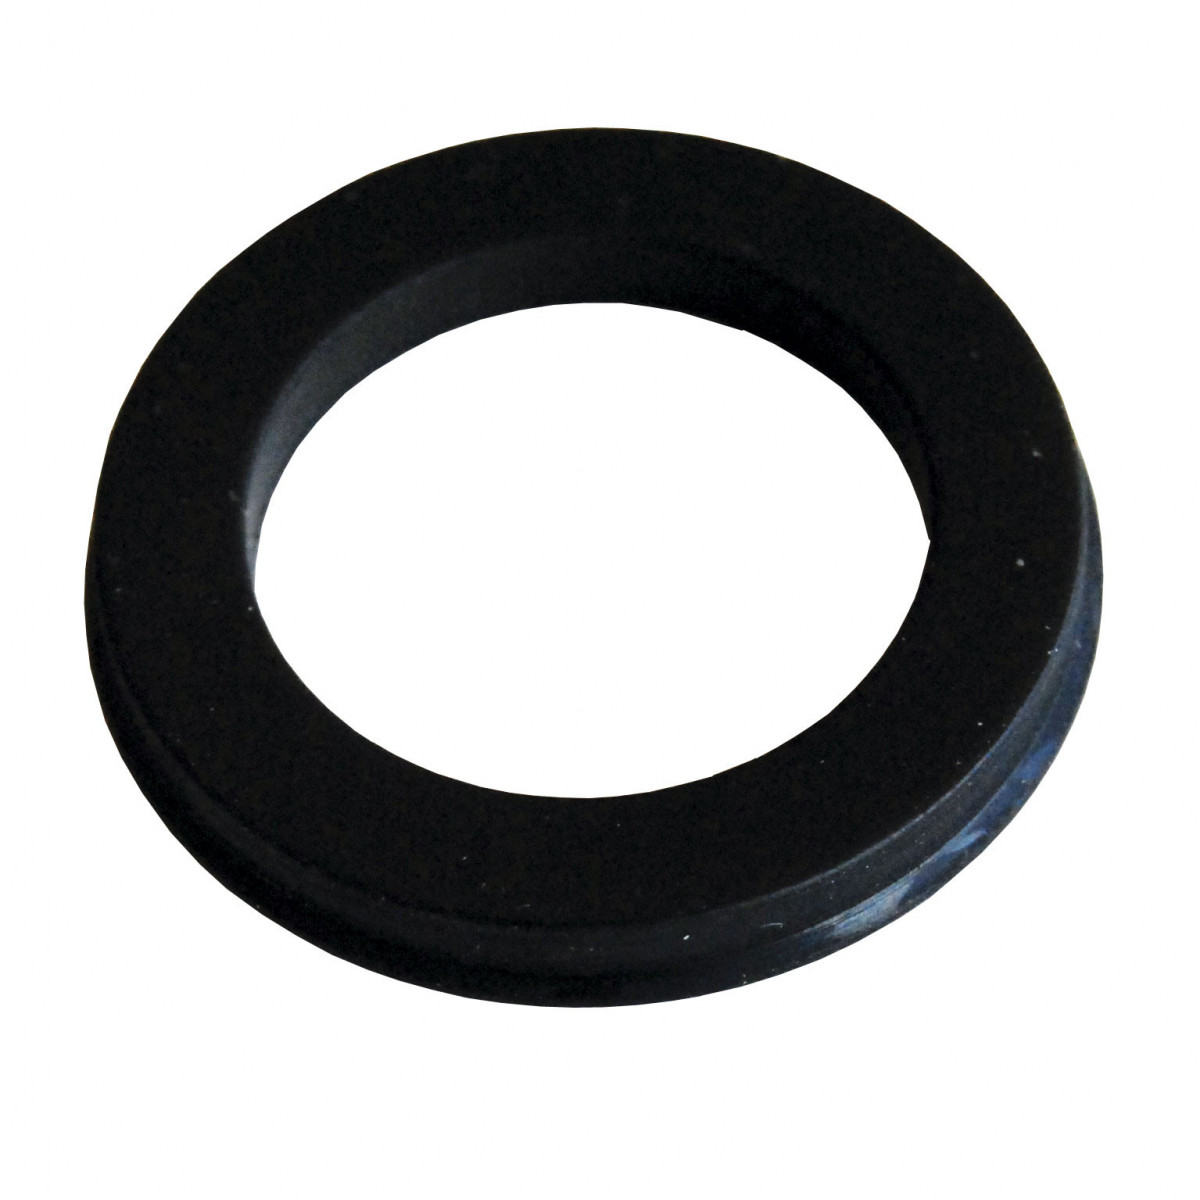 nut seal for hose barbs 20mm